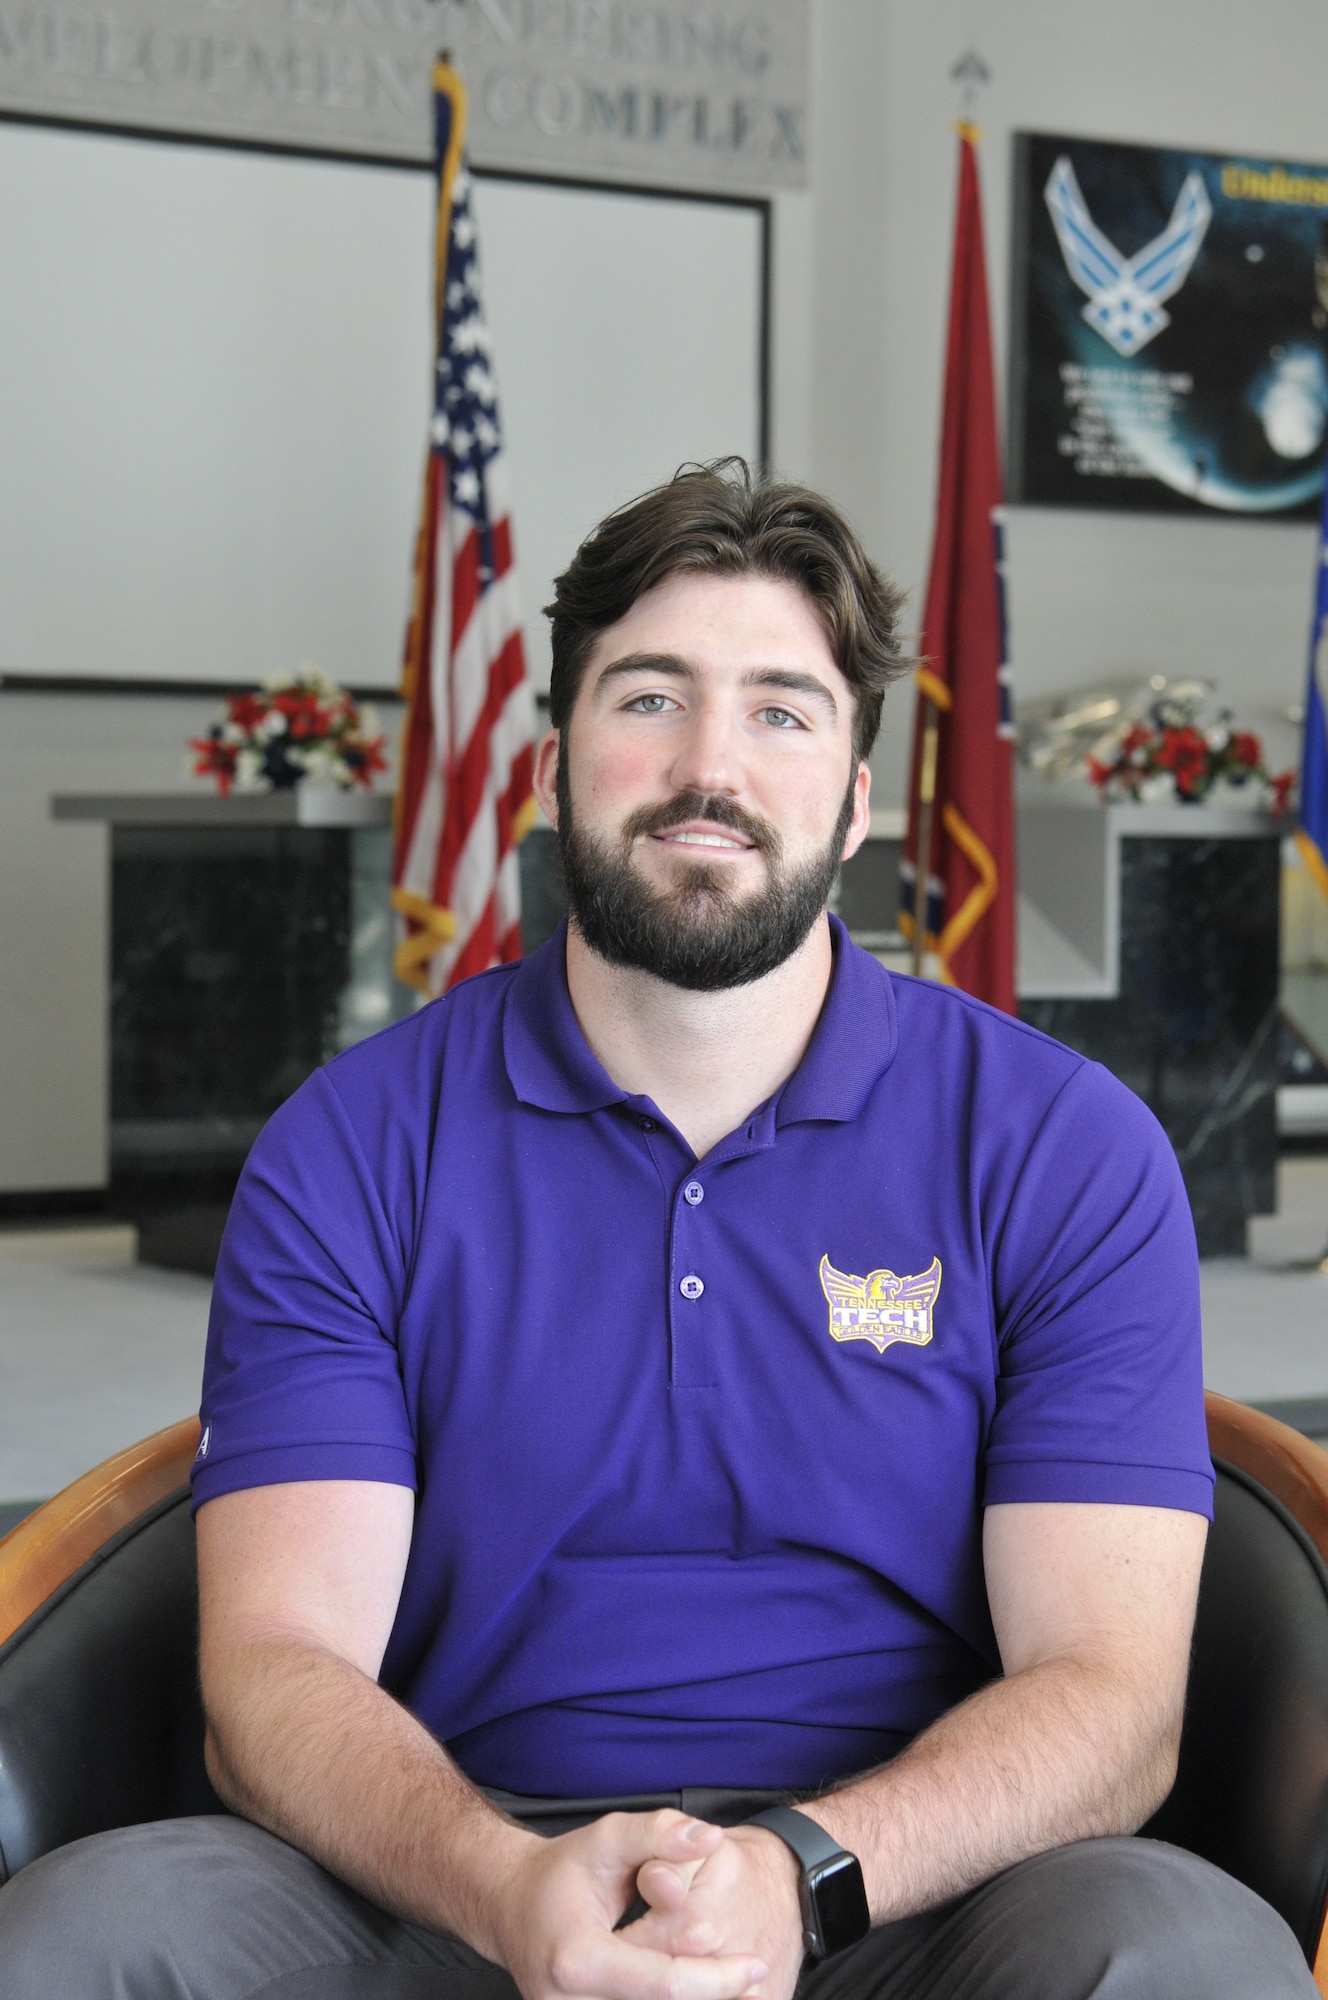 Zachary Collins, engineer intern at Arnold Engineering Development Complex, looks at the camera for the photo while sitting in a chair in the lobby of the Administration and Engineering Building at Arnold Air Force Base, Tenn.